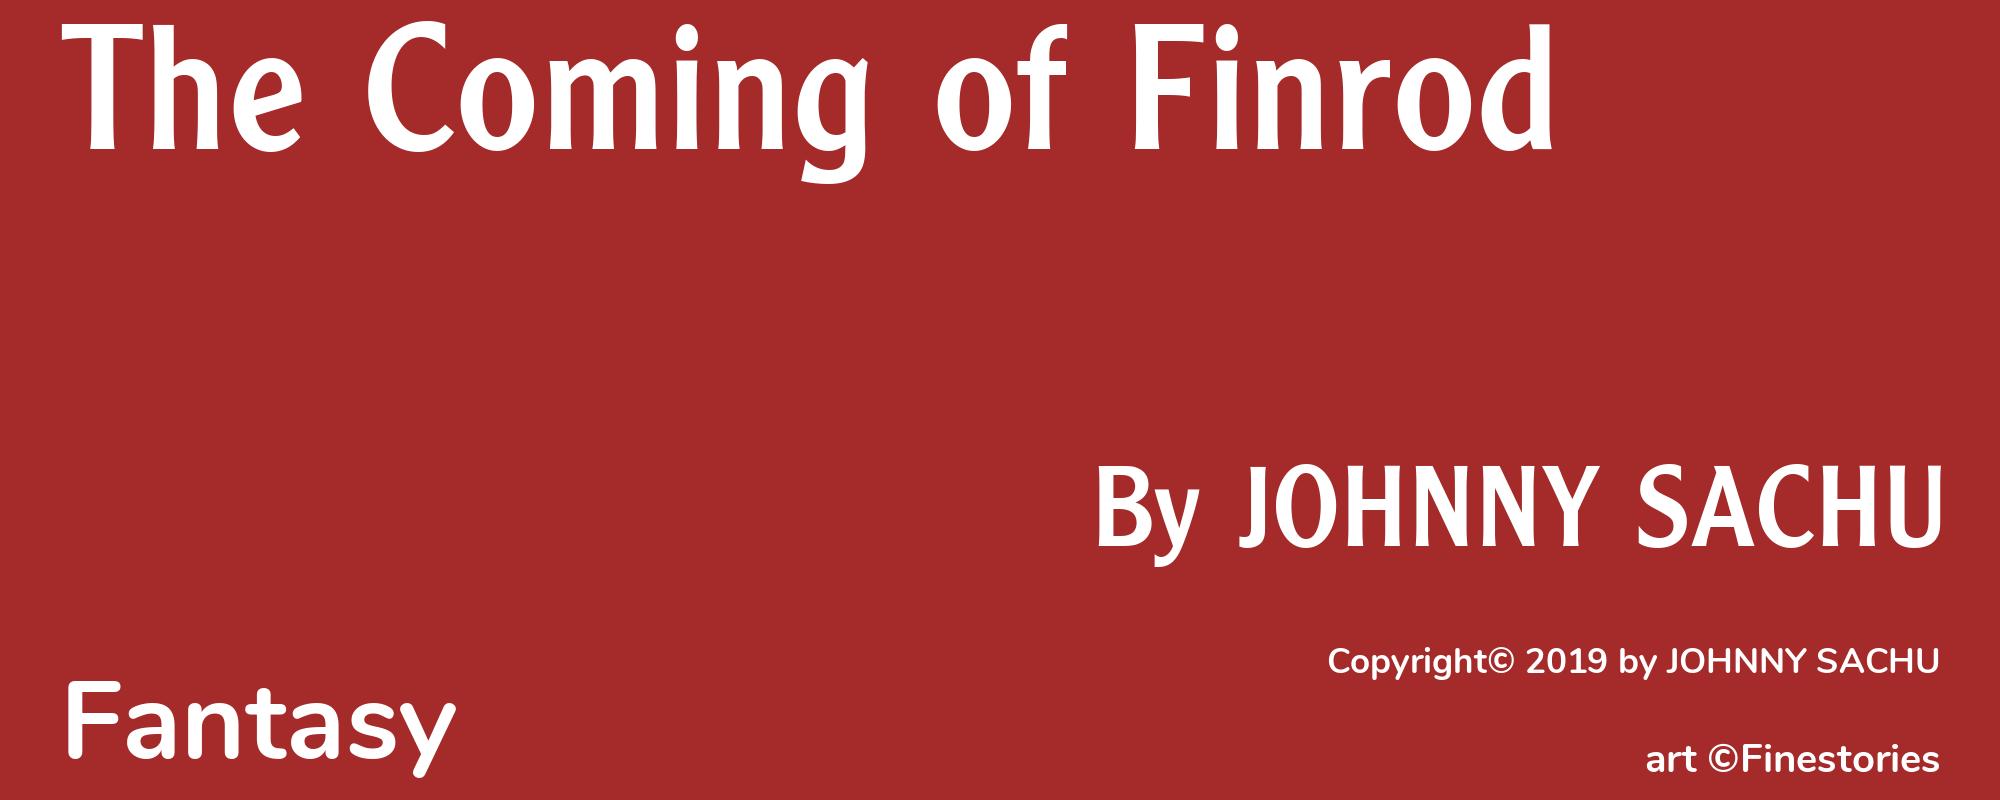 The Coming of Finrod - Cover